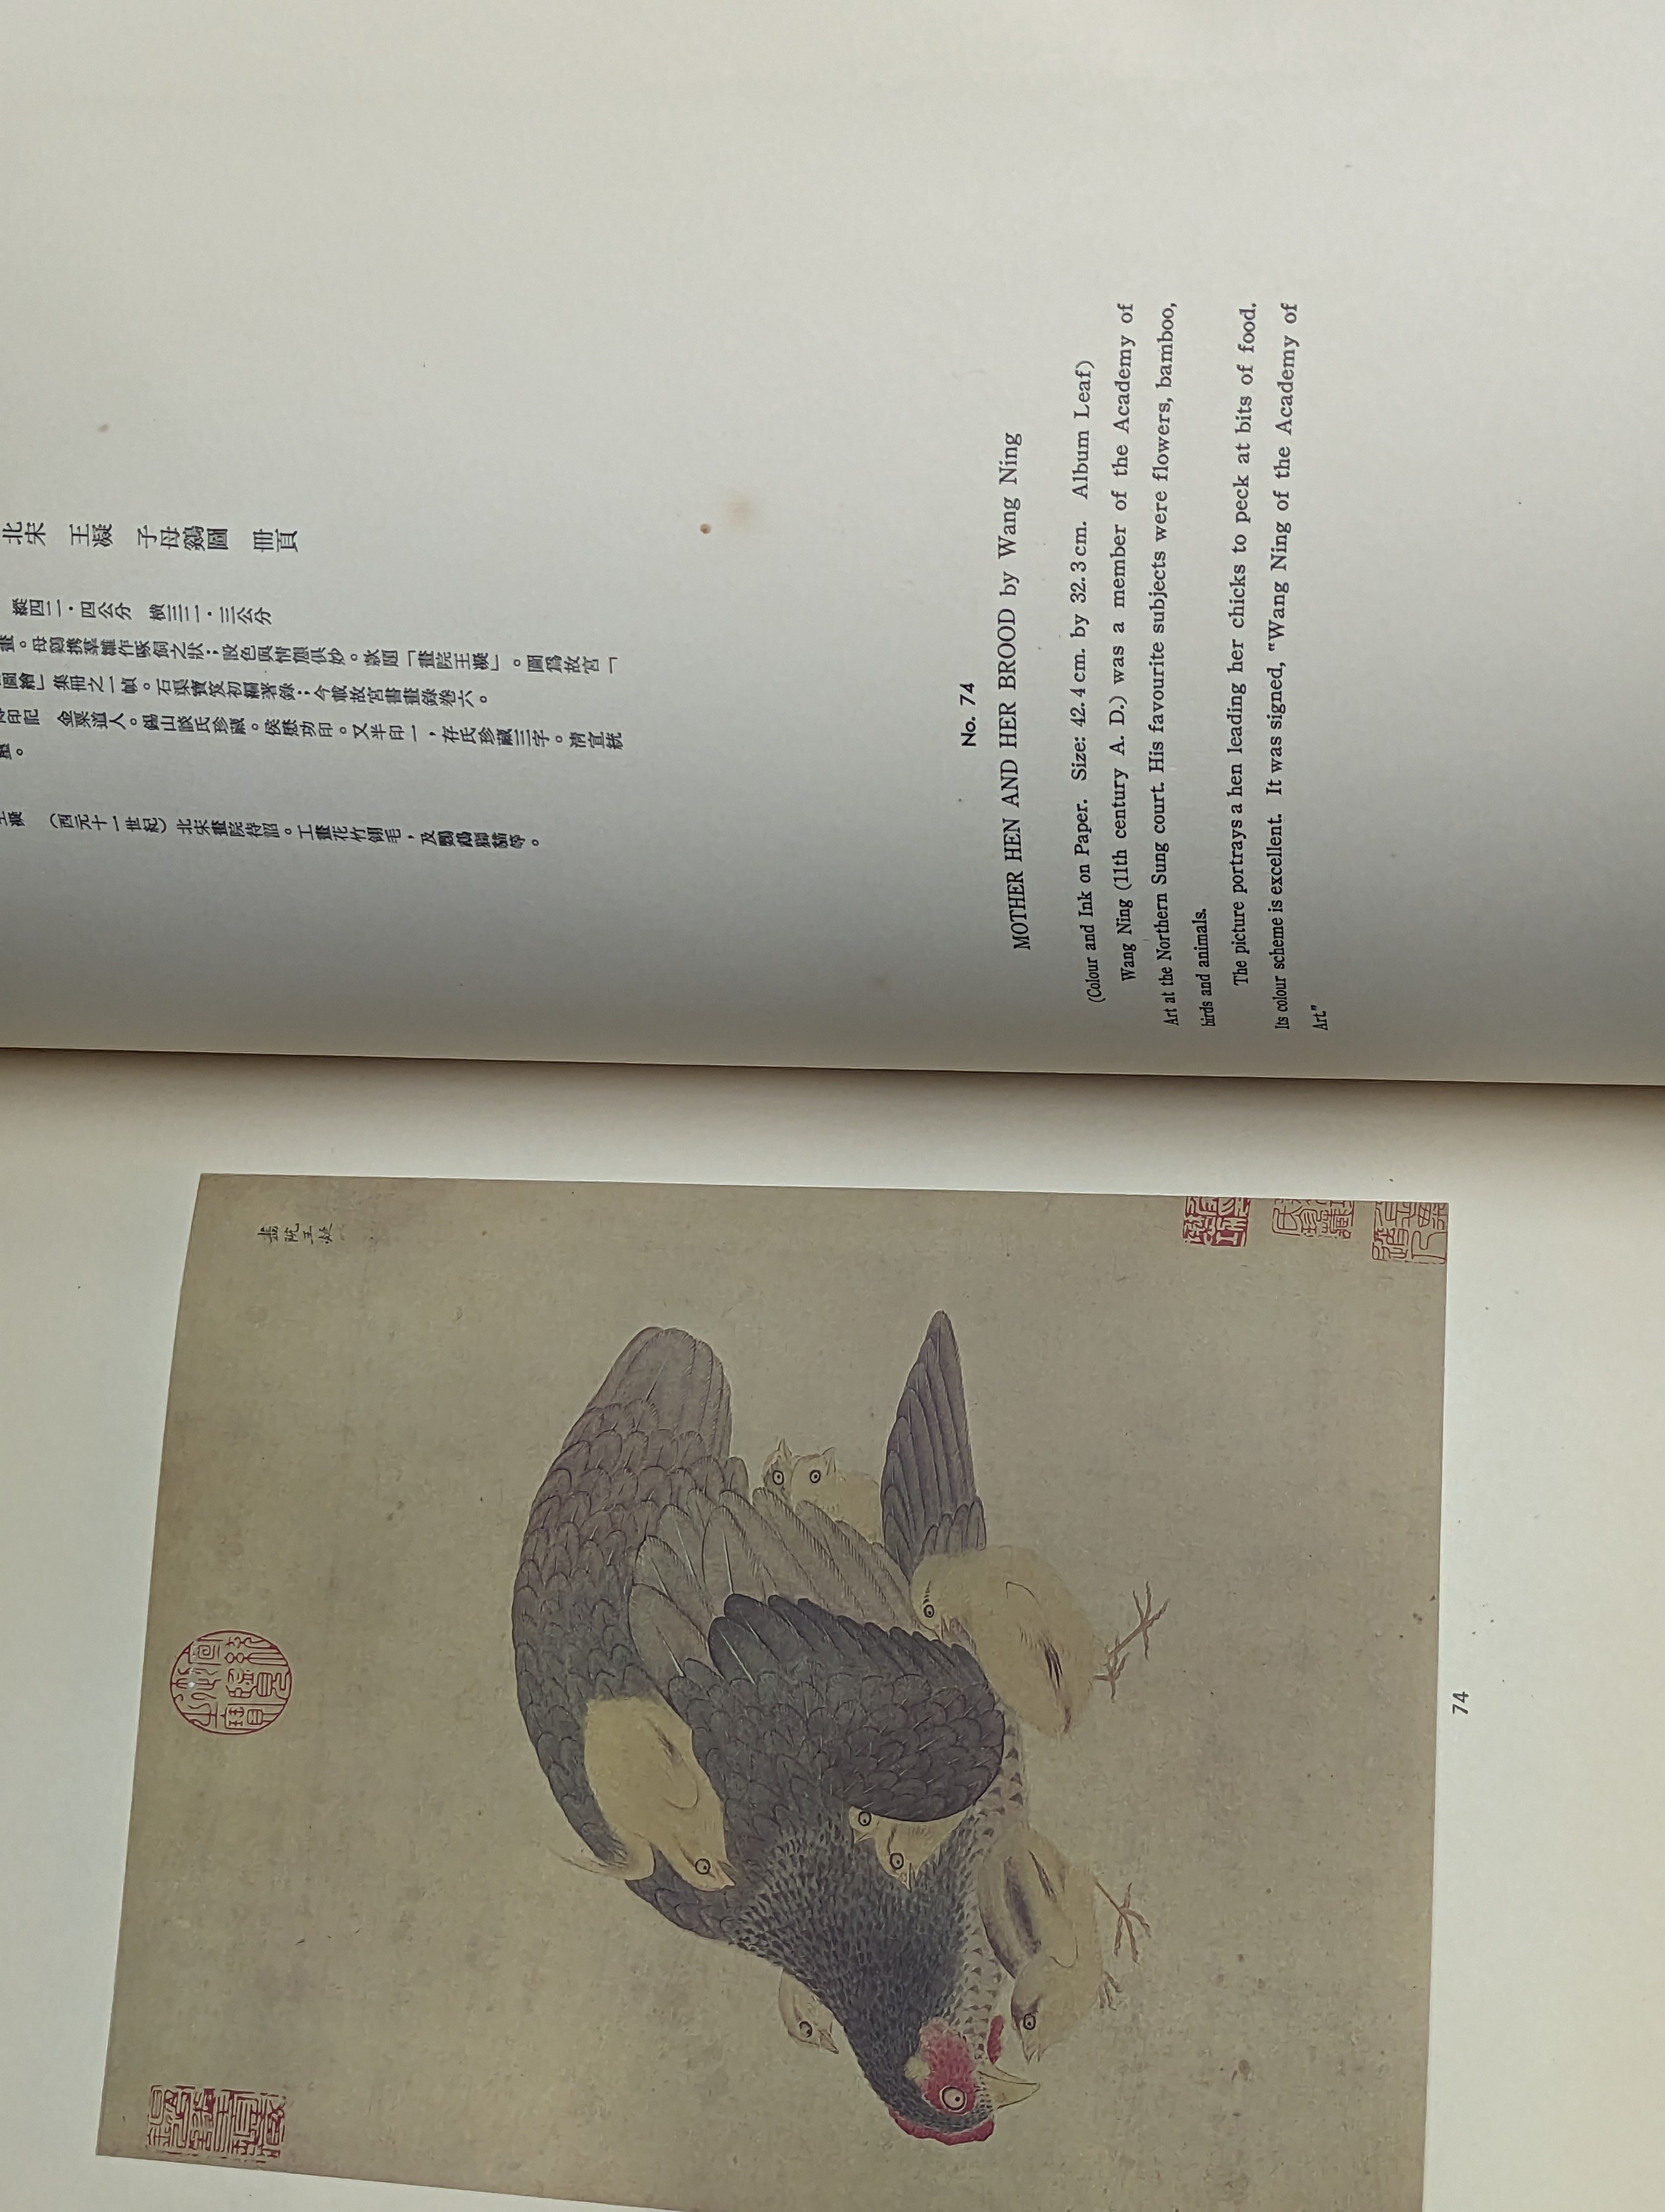 THREE HUNDRED MASTERPIECES OF CHINESE PAINTING IN THE PALACE MUSEUM 1959年 限量編號精裝《故宮名畫三百種》2函6卷 - Image 27 of 28